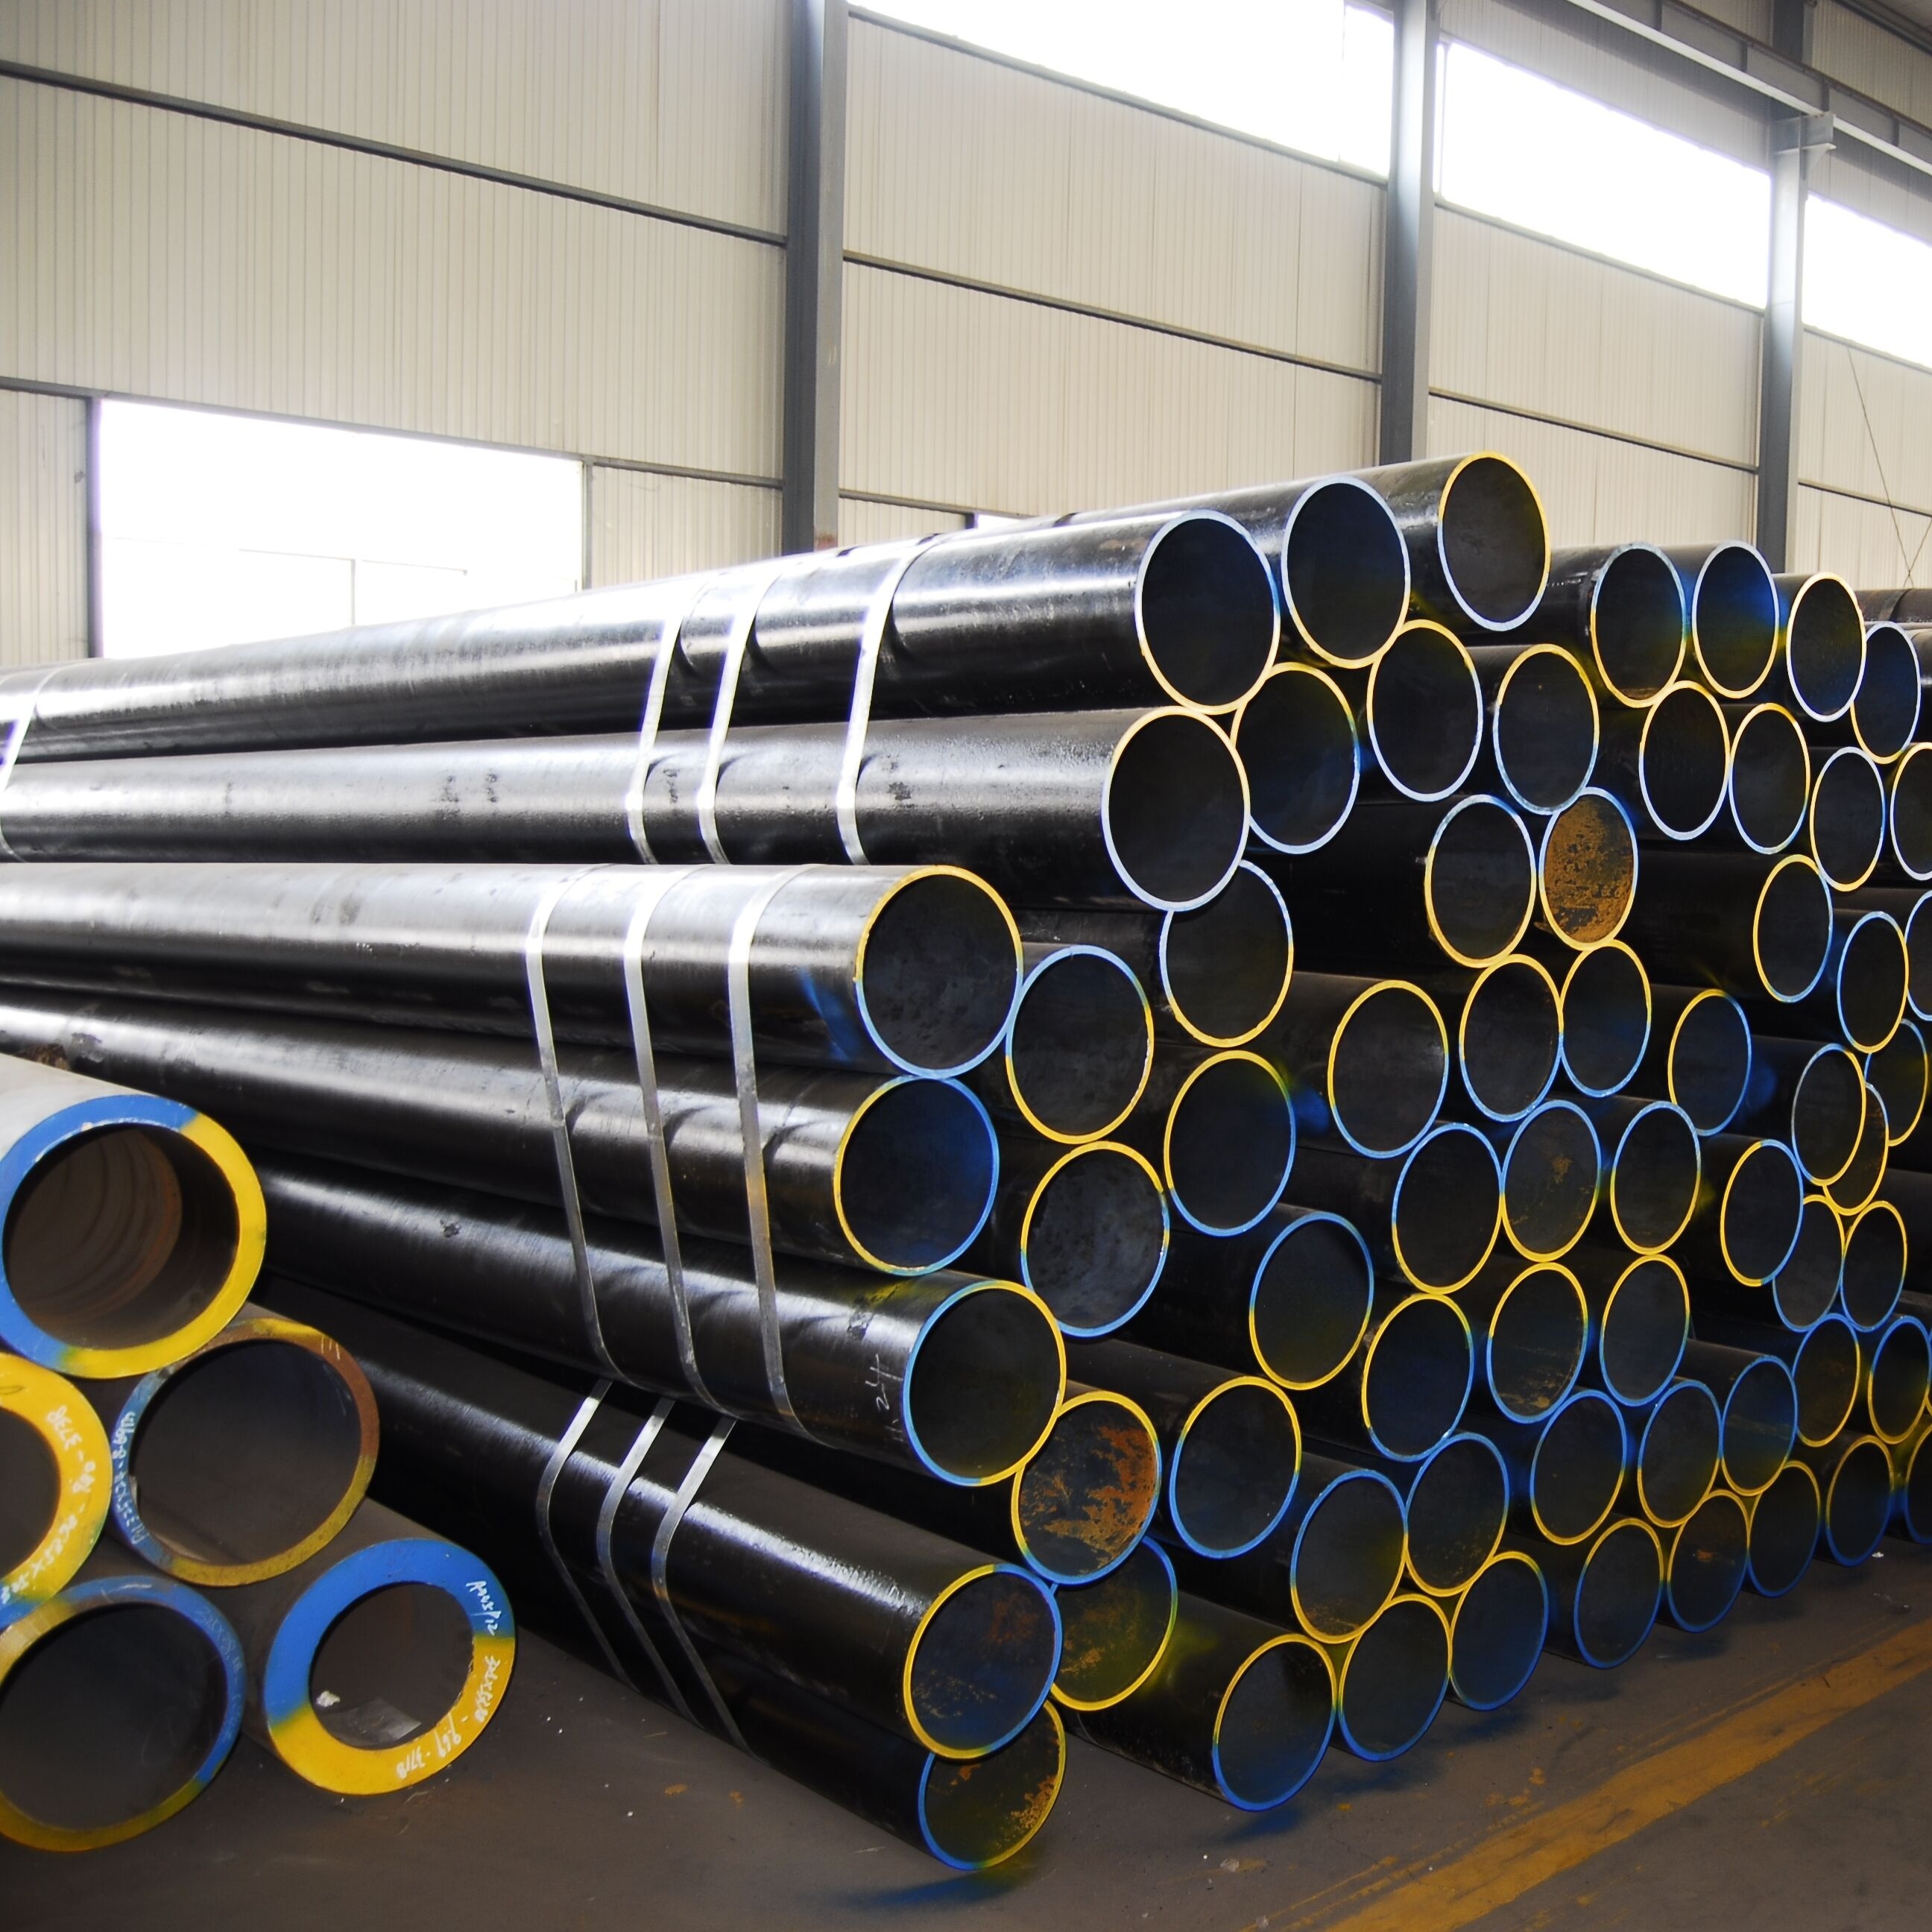 alloy pipe with GB5310 standard. 12Cr1MoVG